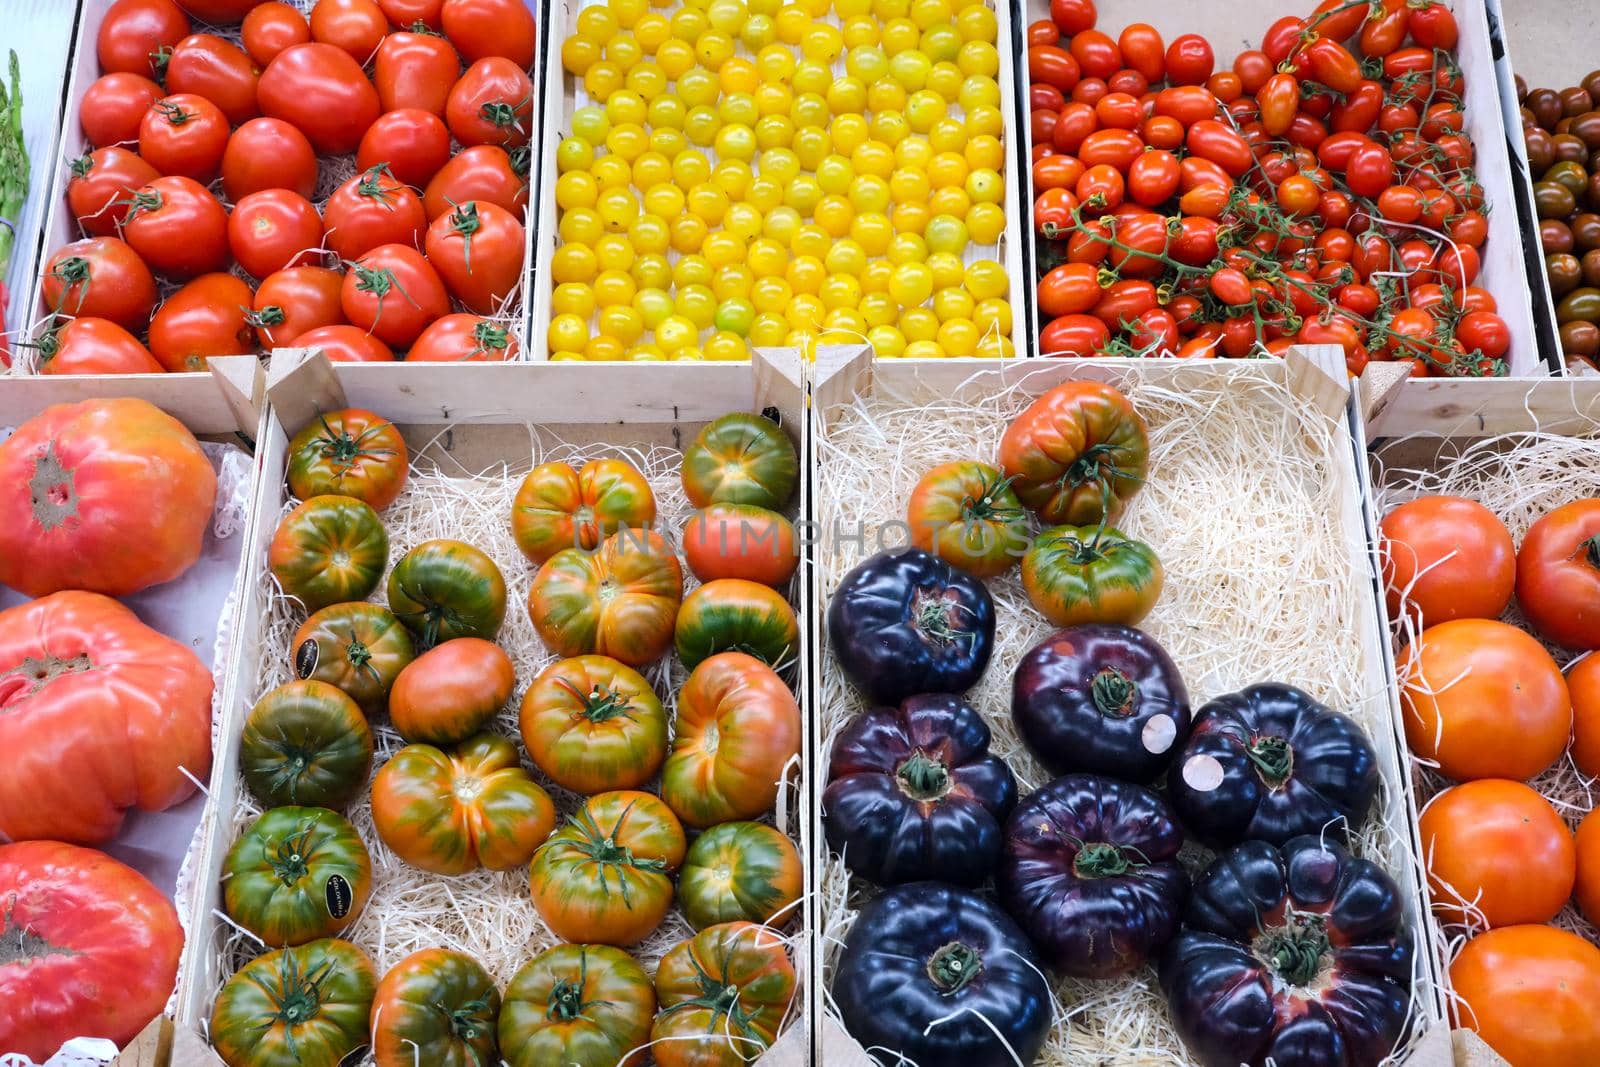 Tomatoes in different colors and shapes by elxeneize